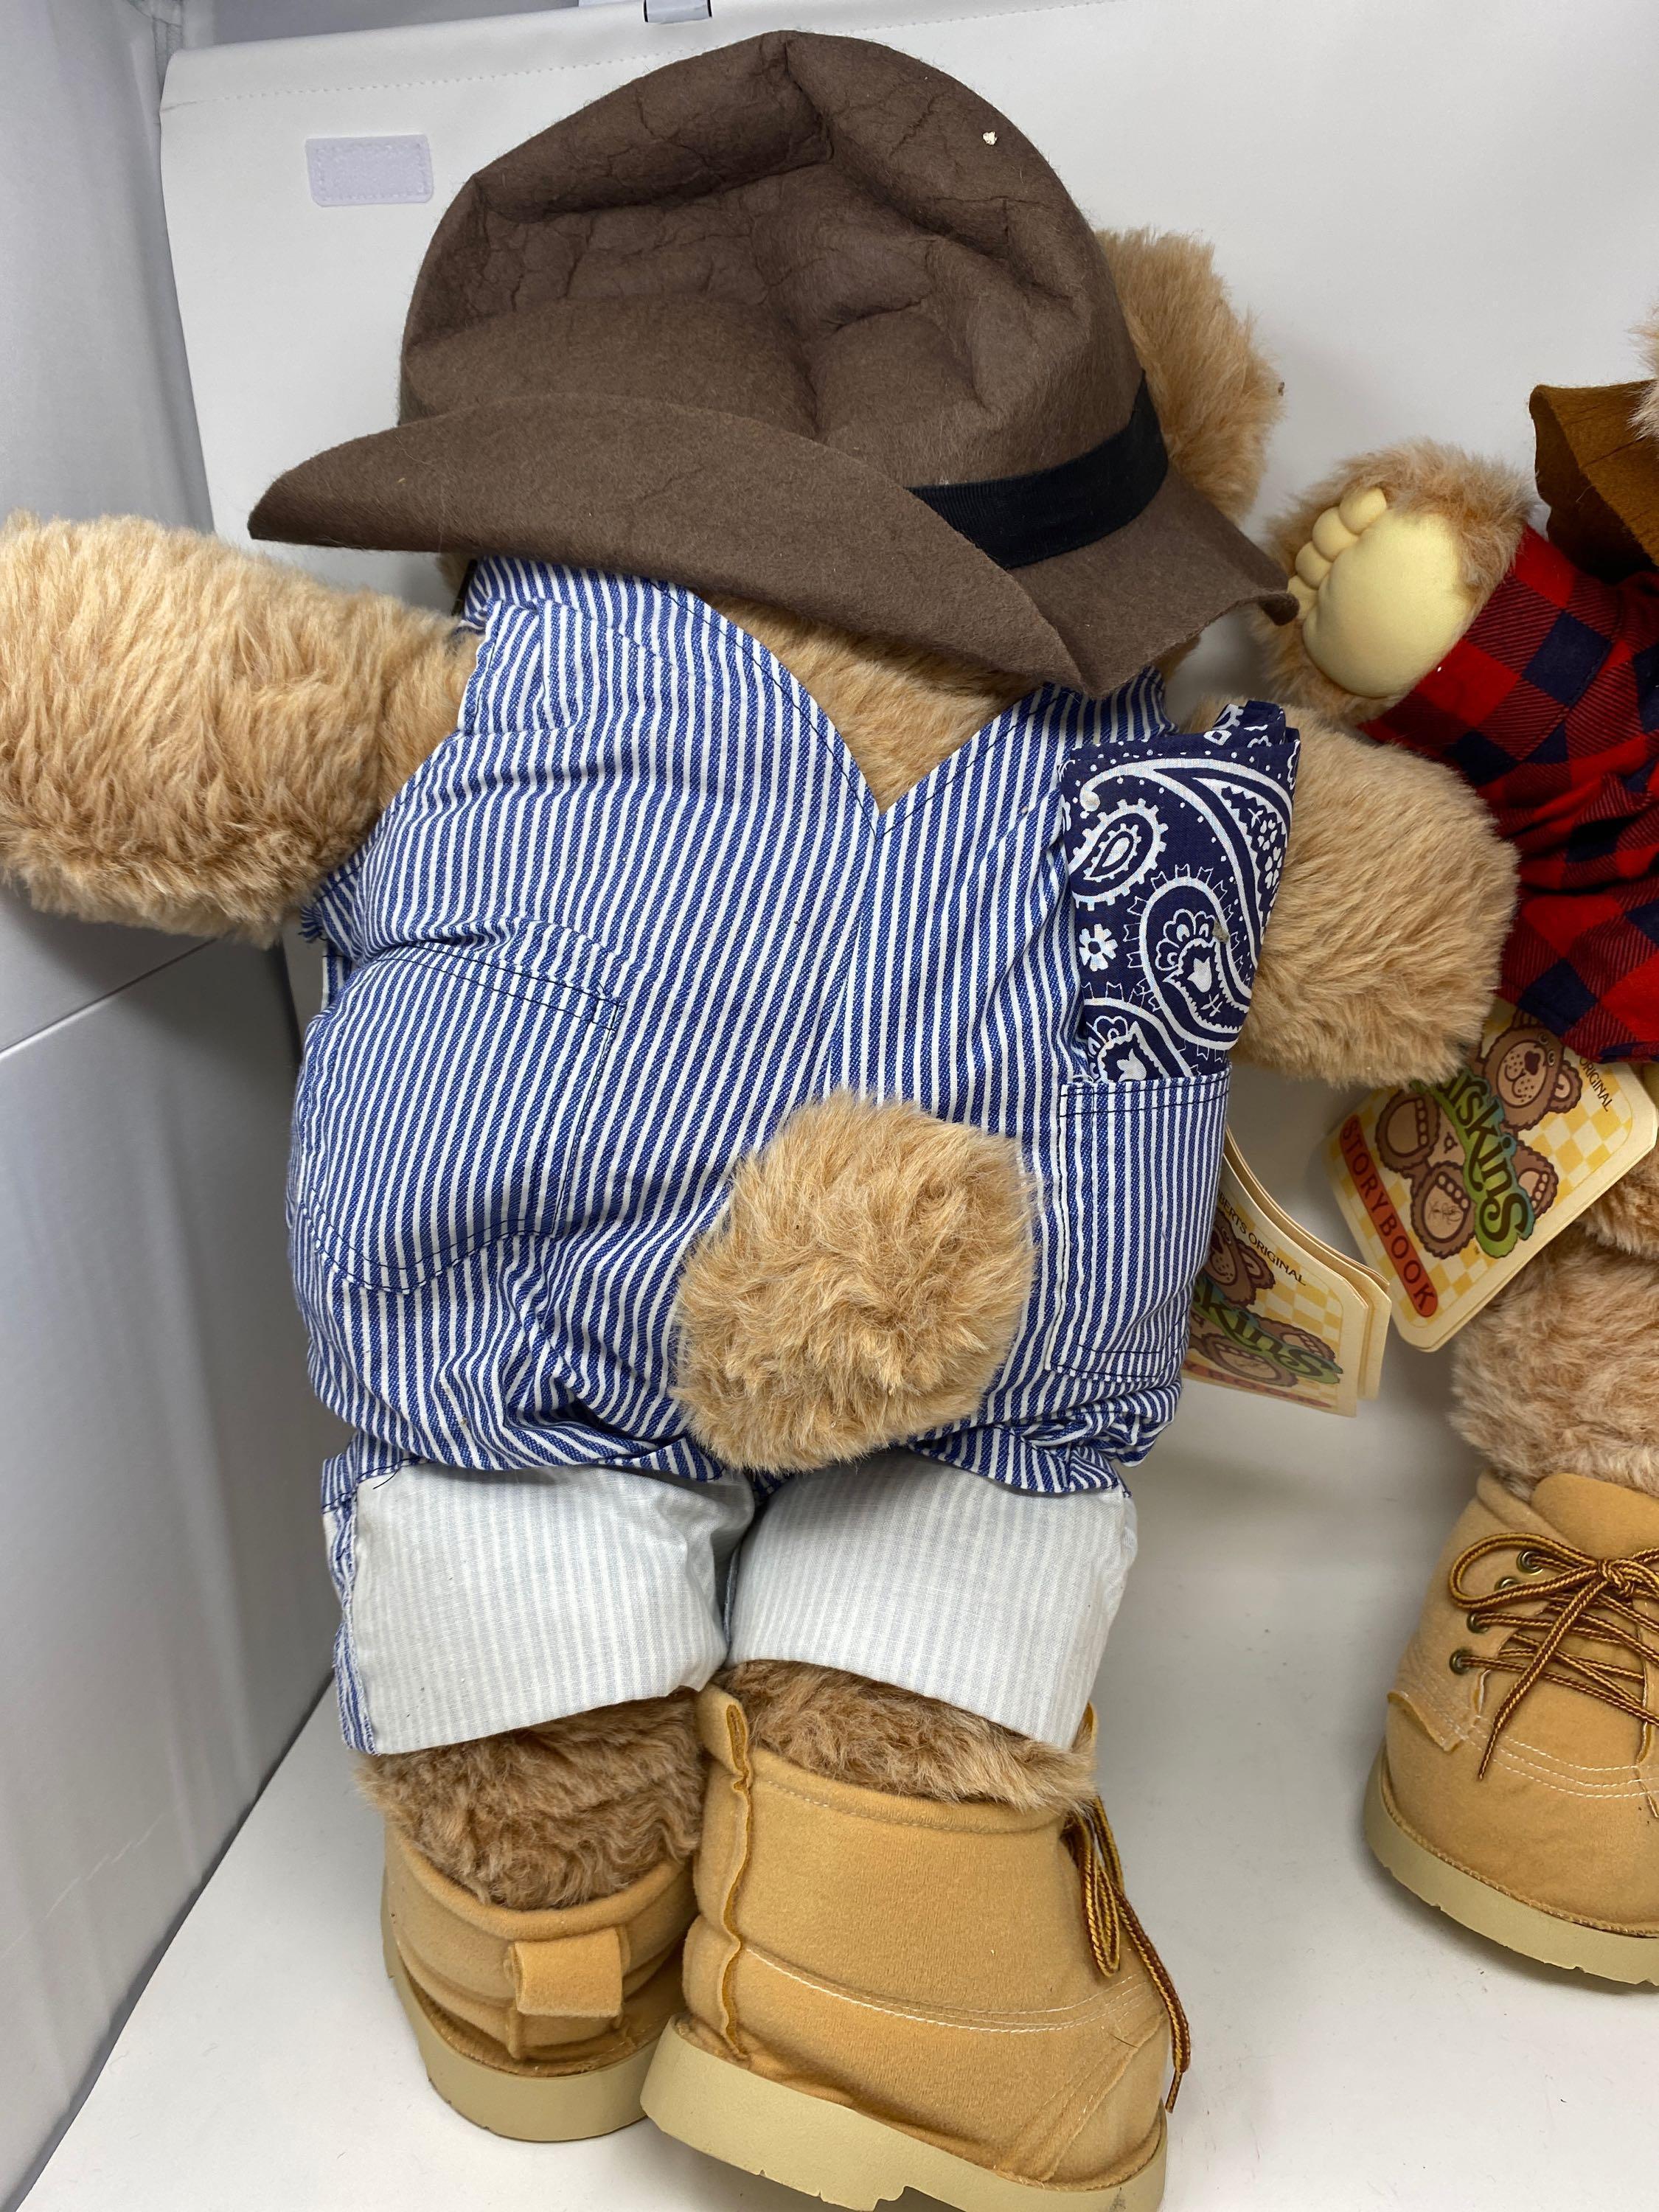 2 Furskins Bears- One in Plaid Shirt, Other in Overalls